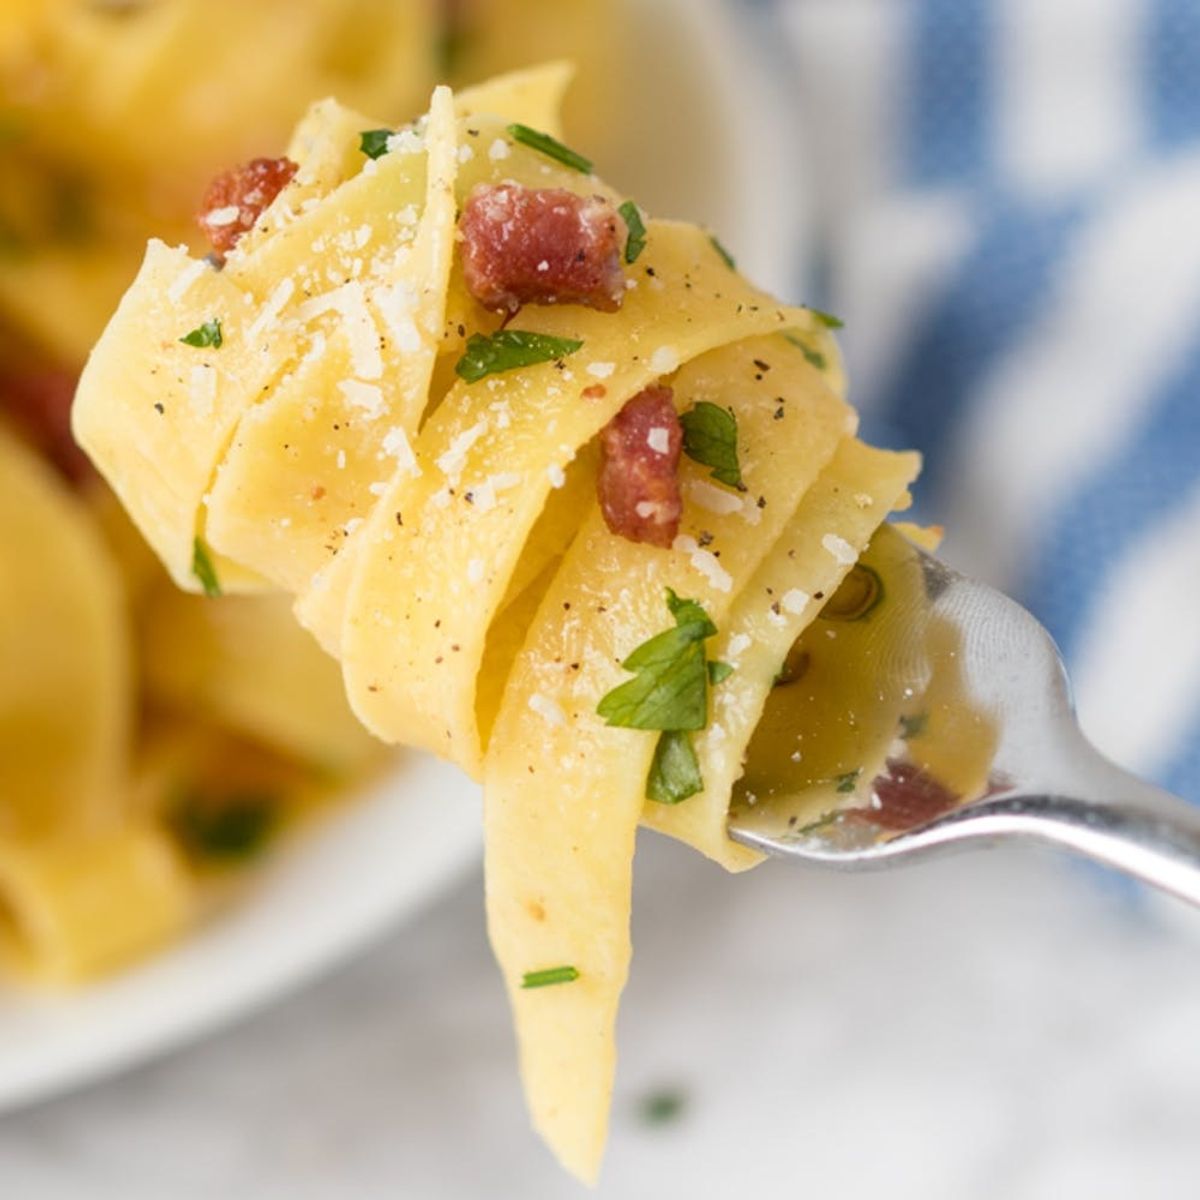 Go Egg Crazy for Easter With This Creamy Egg and Bacon Carbonara